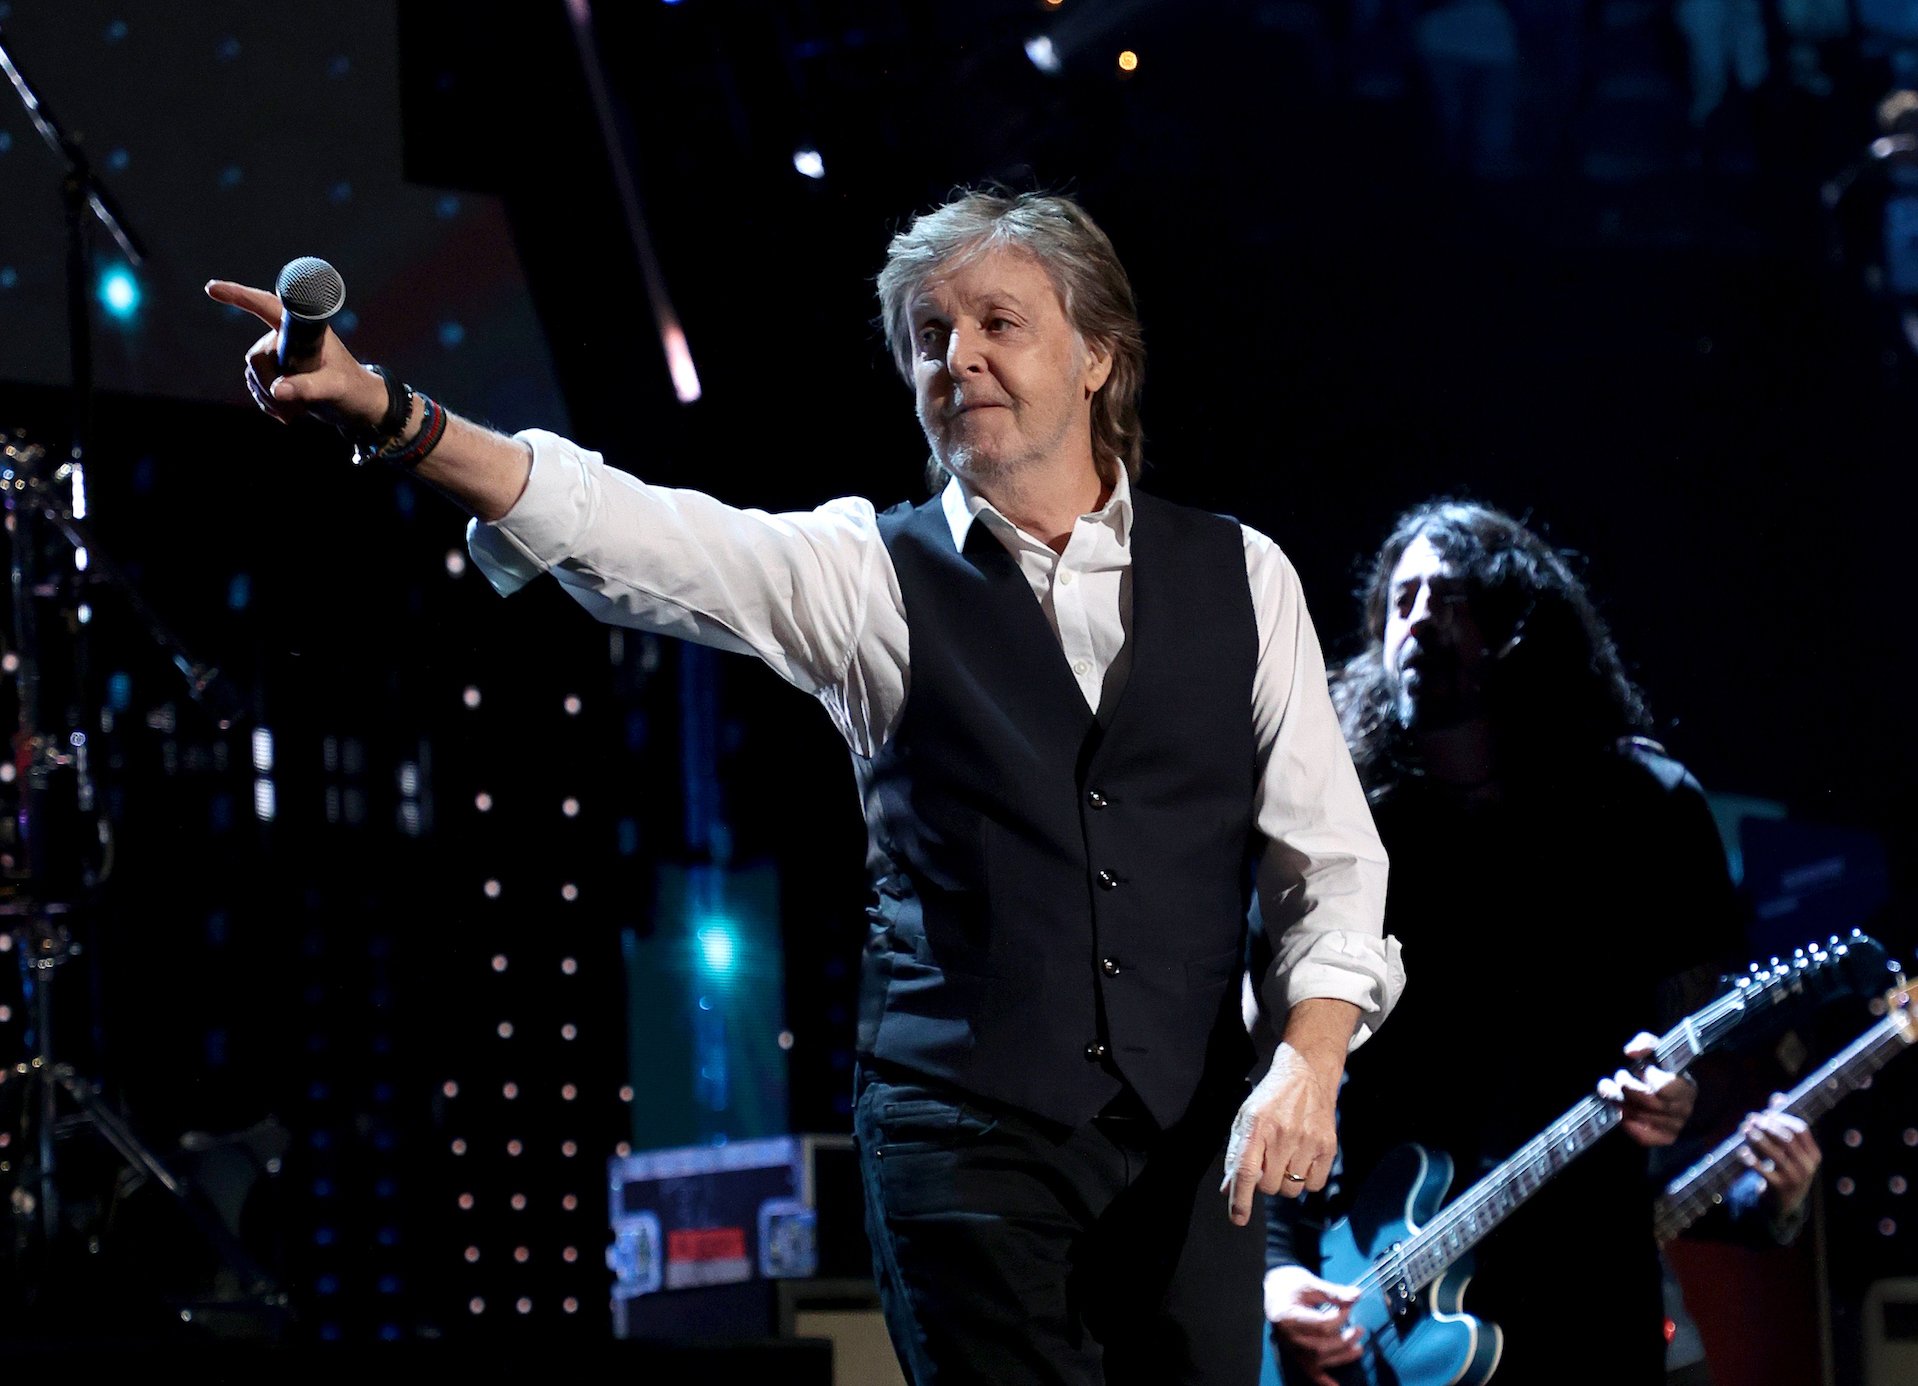 Paul McCartney performs during the Rock and Roll Hall of Fame Induction Ceremony in Cleveland, Ohio